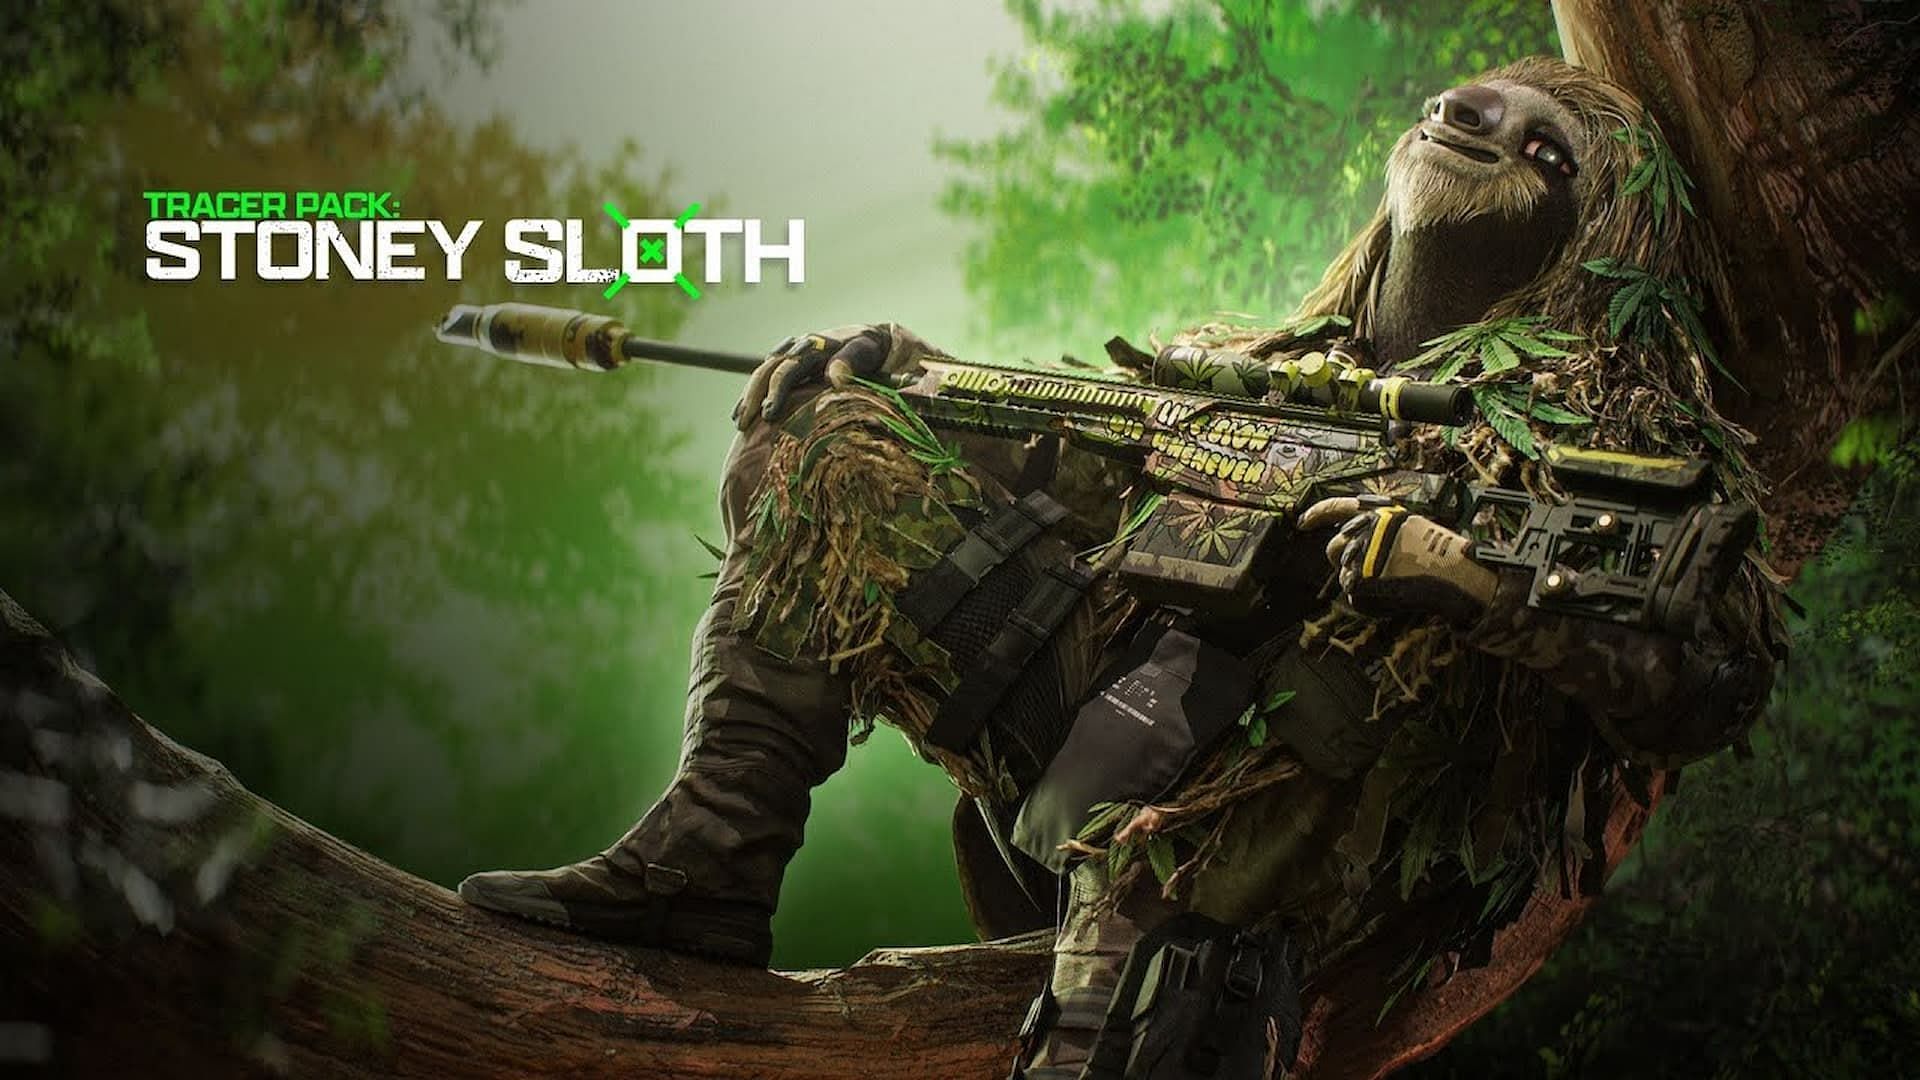 The Blaze Up 4/20 event will introduce the Stoney Sloth bundle (Image via Activision)